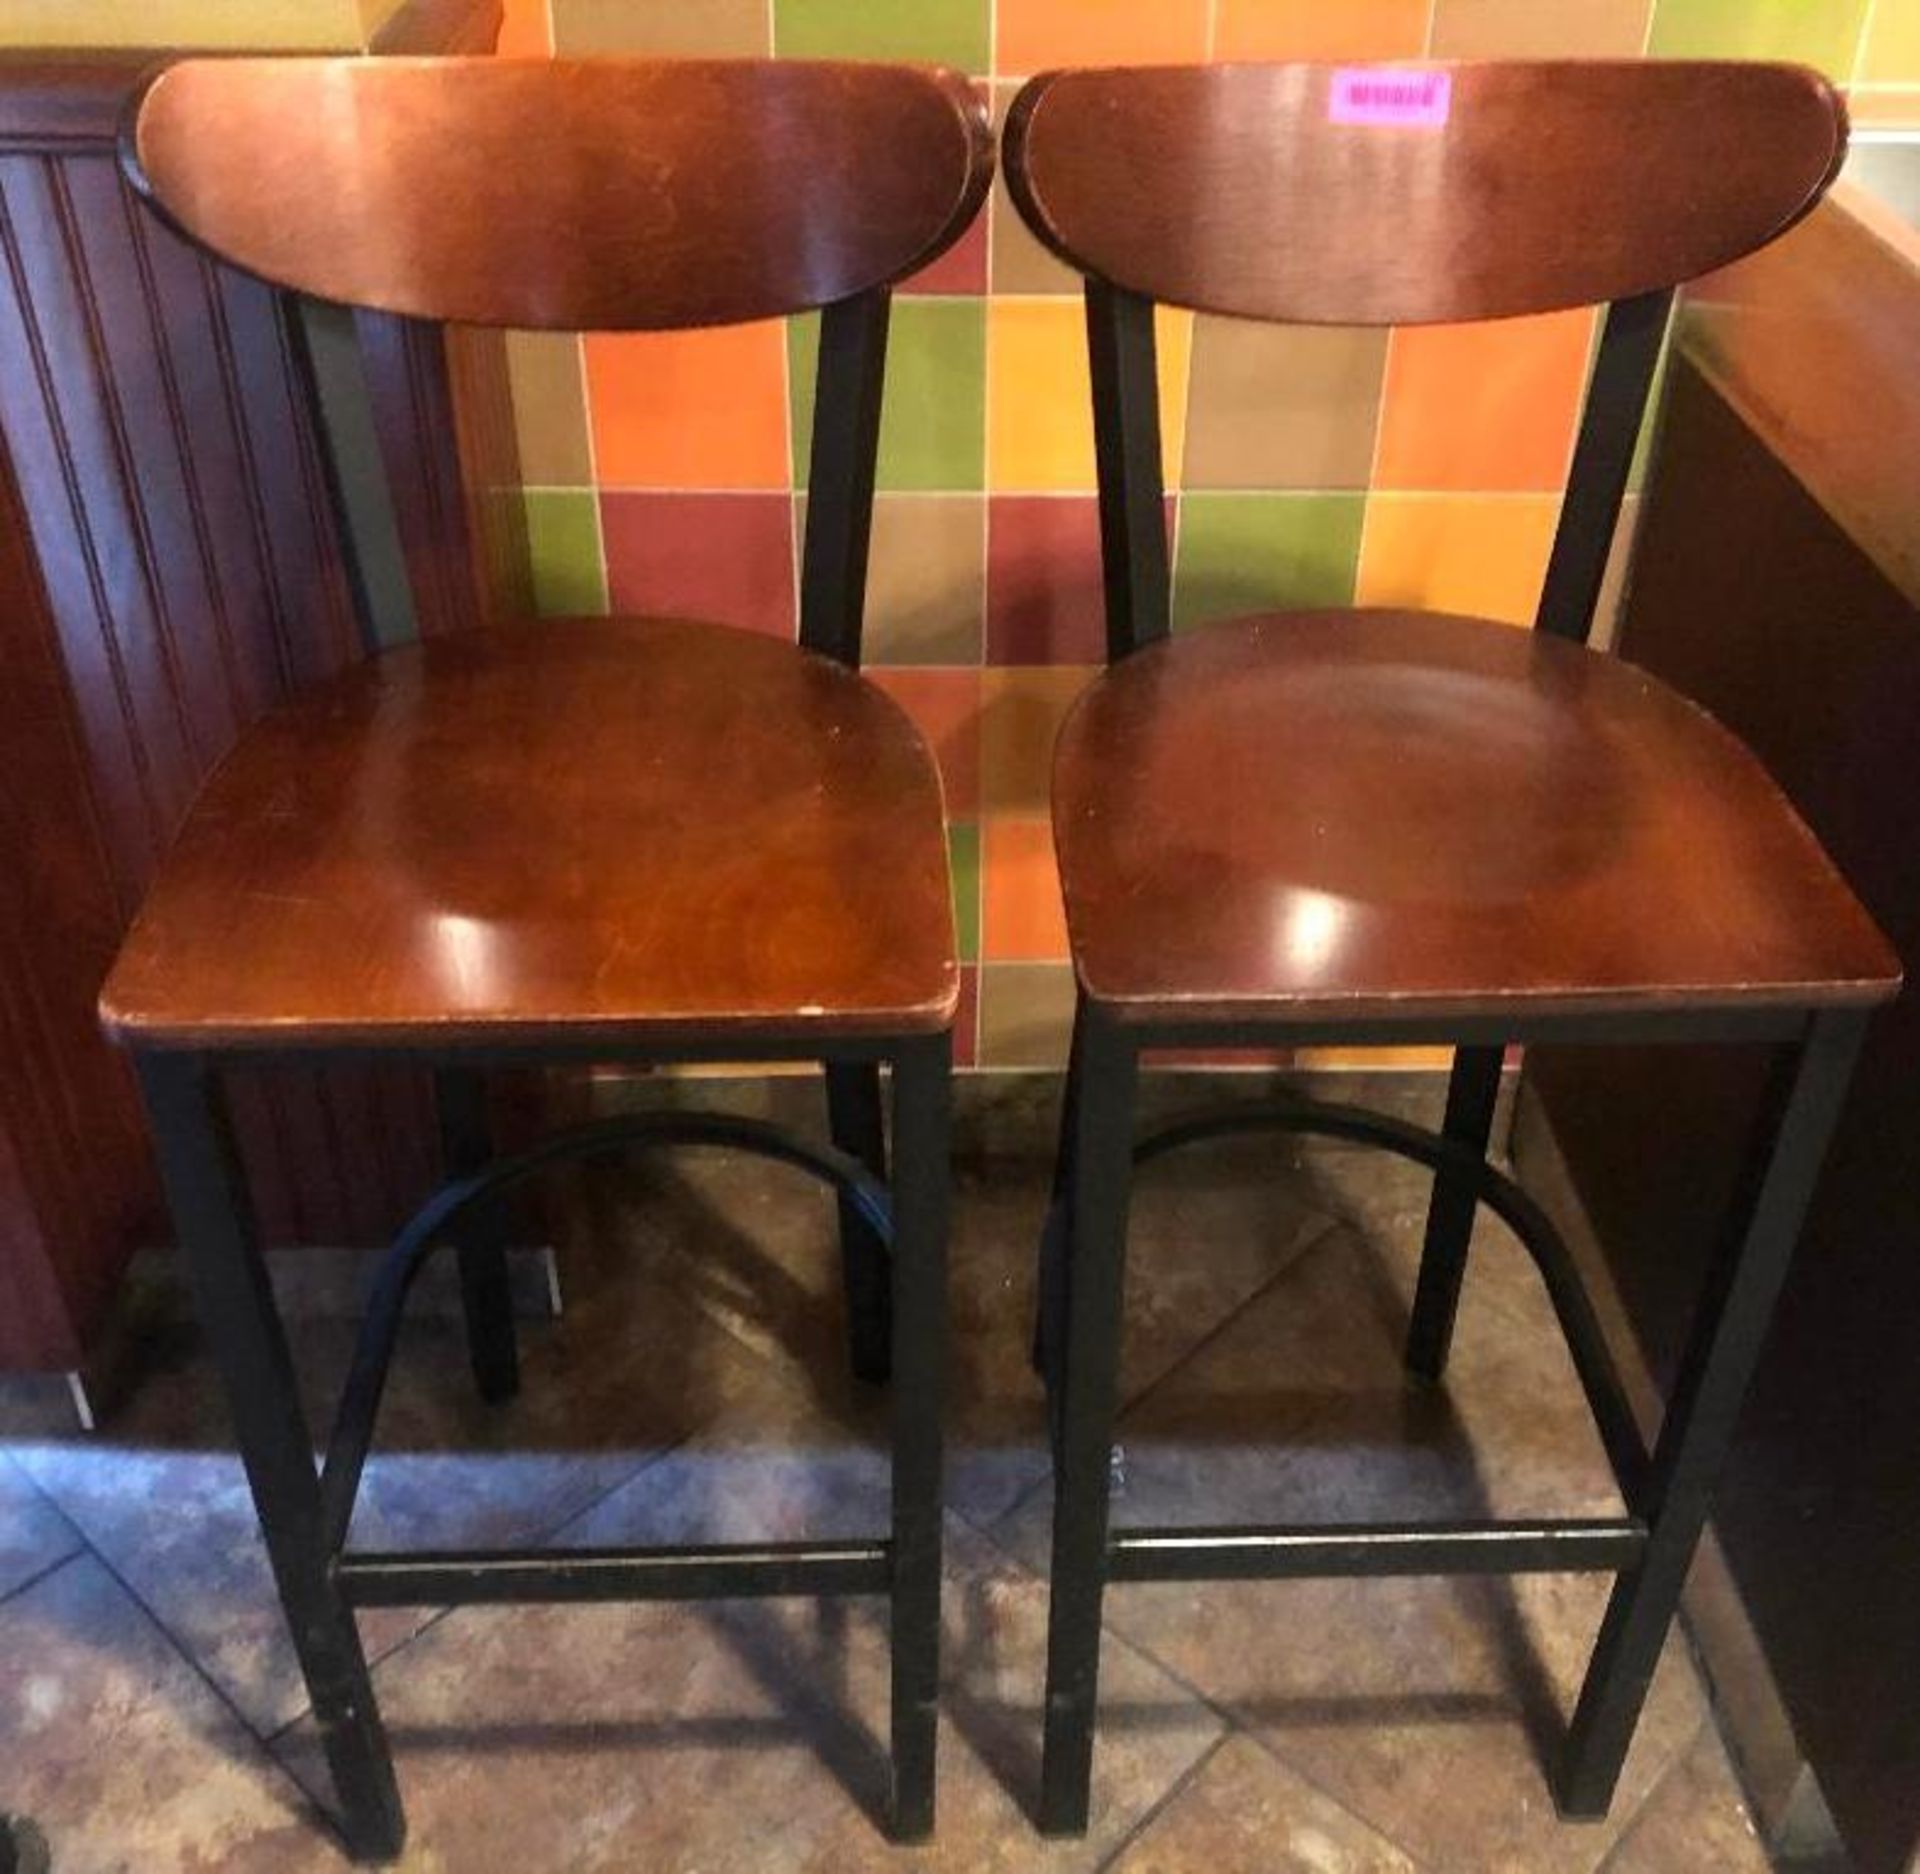 DESCRIPTION: (2) 30" METAL FRAMED BAR STOOLS W/ WOODEN SEATS BRAND / MODEL: WALSH AND SIMMONS SIZE: